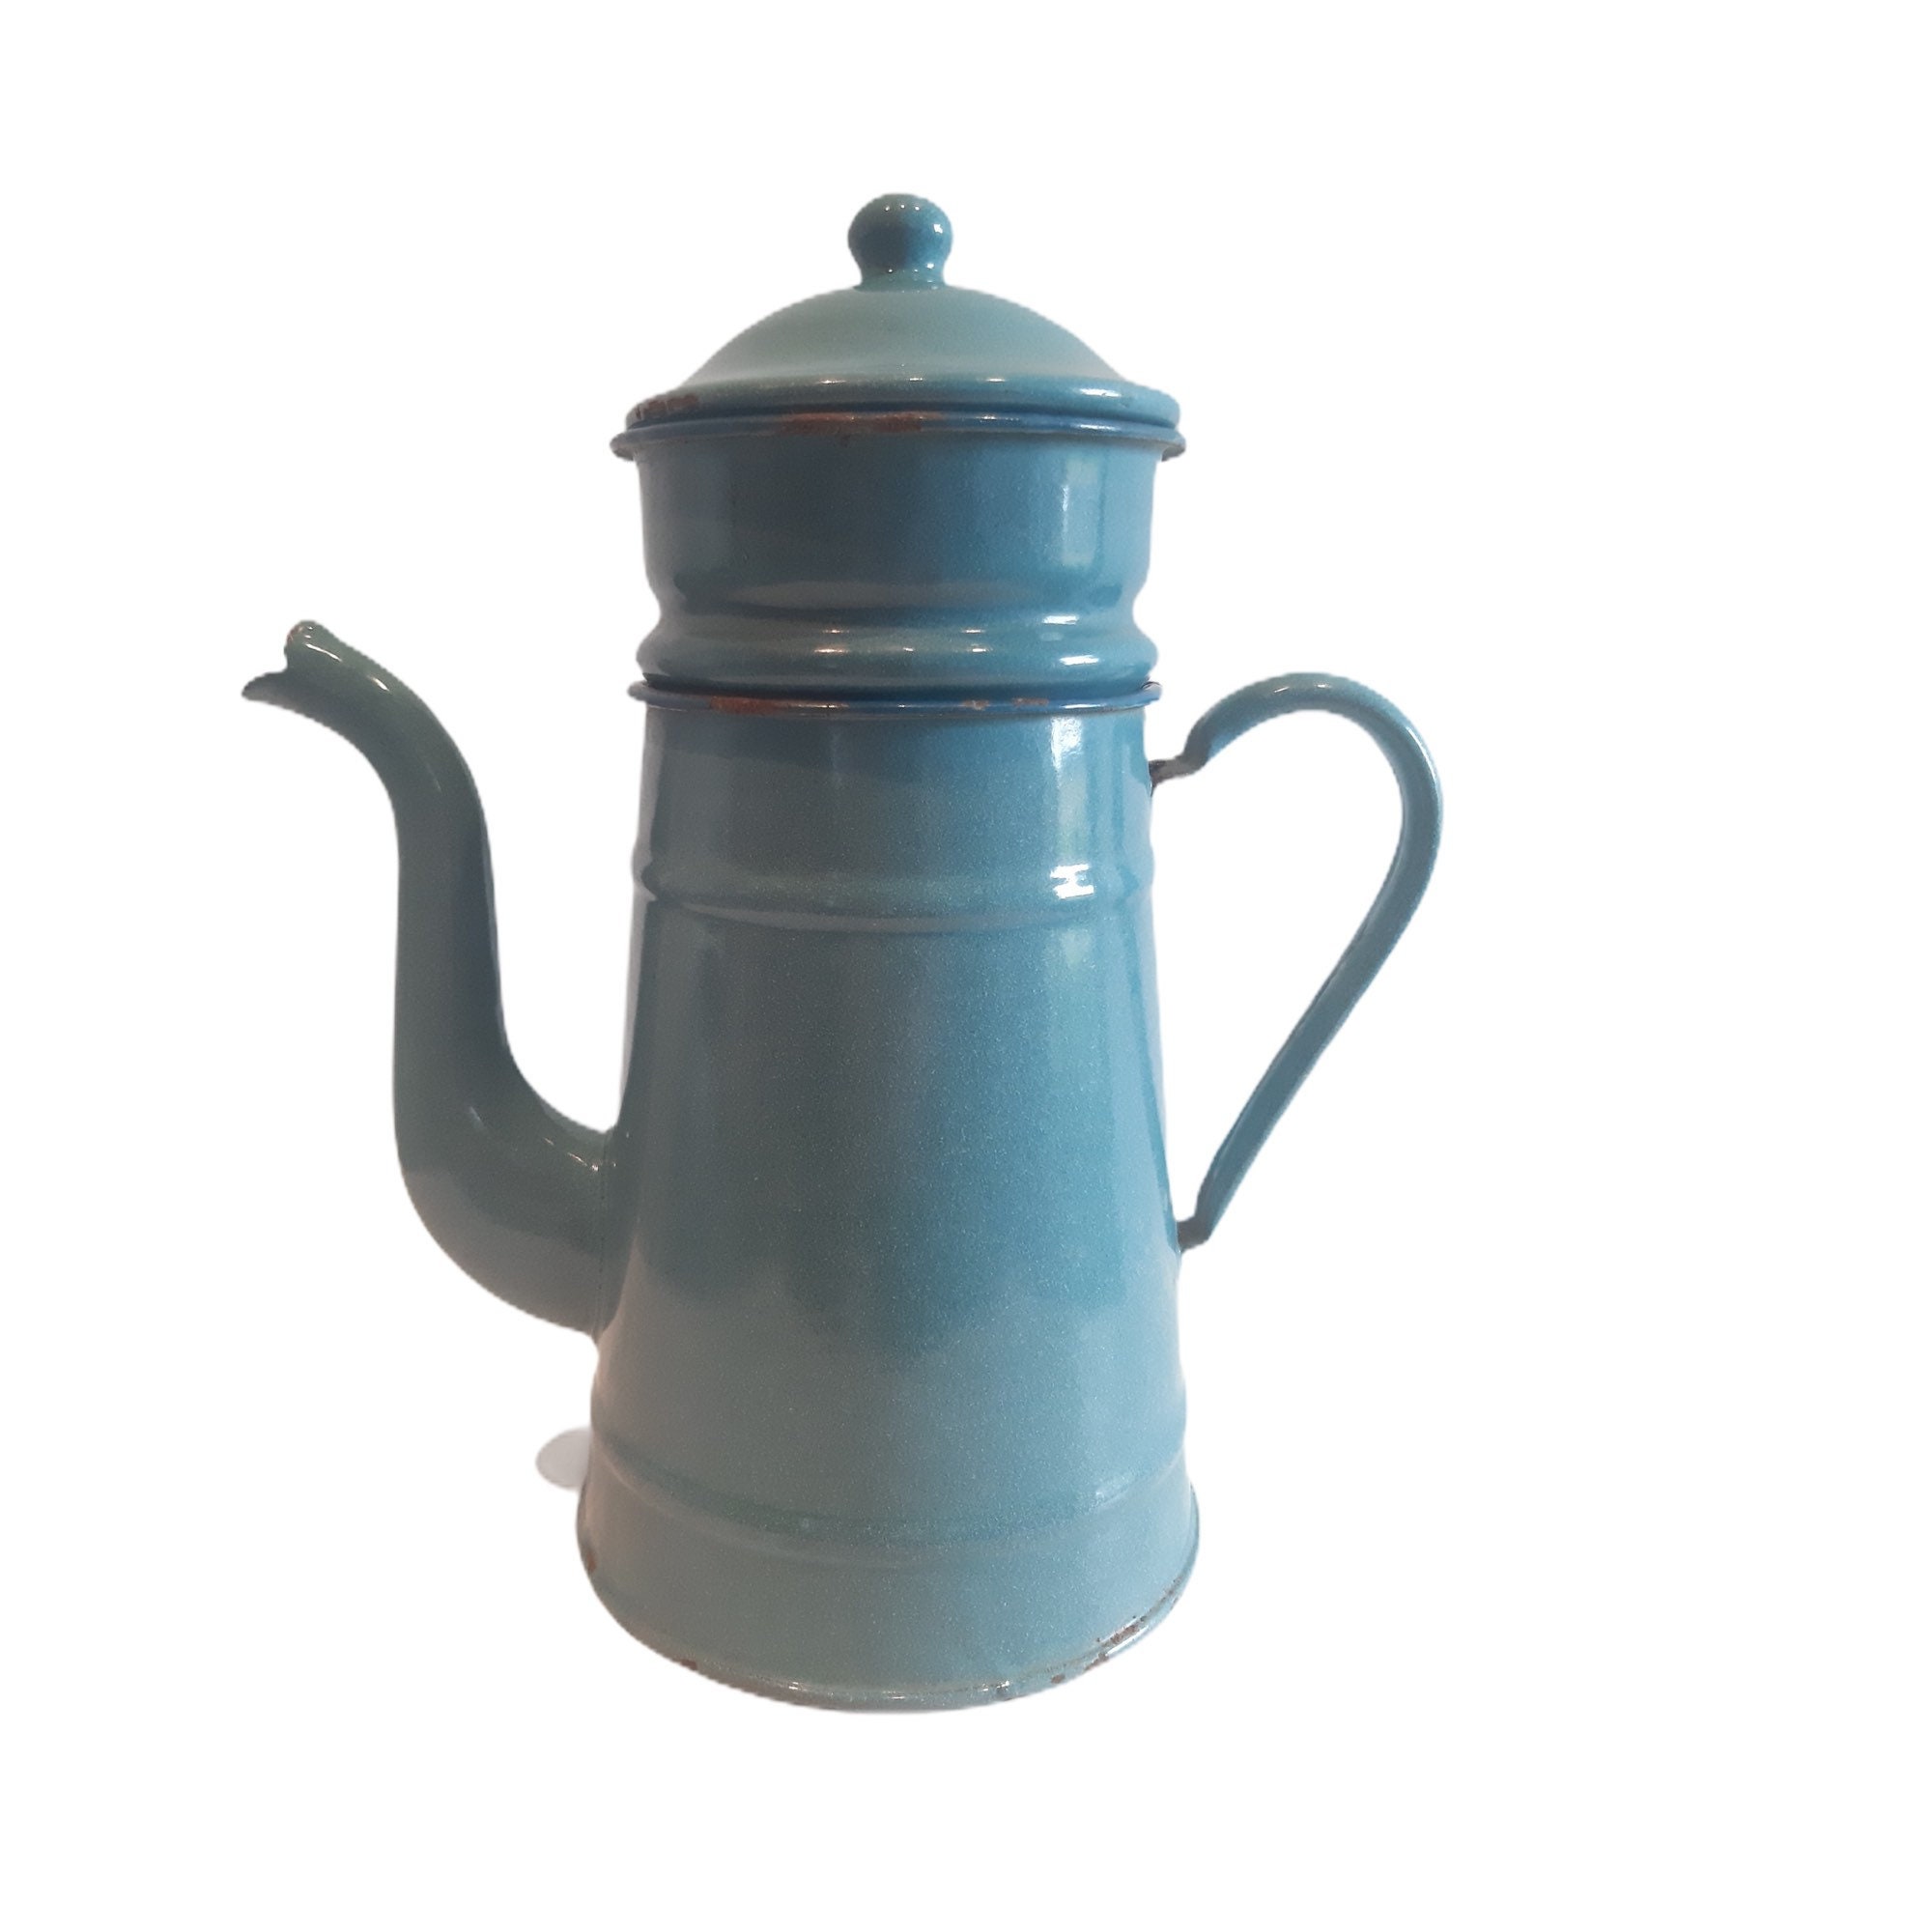 Vintage Blue Enamel Coffee Pot 6” Tall Collectible Enamelware Speckled